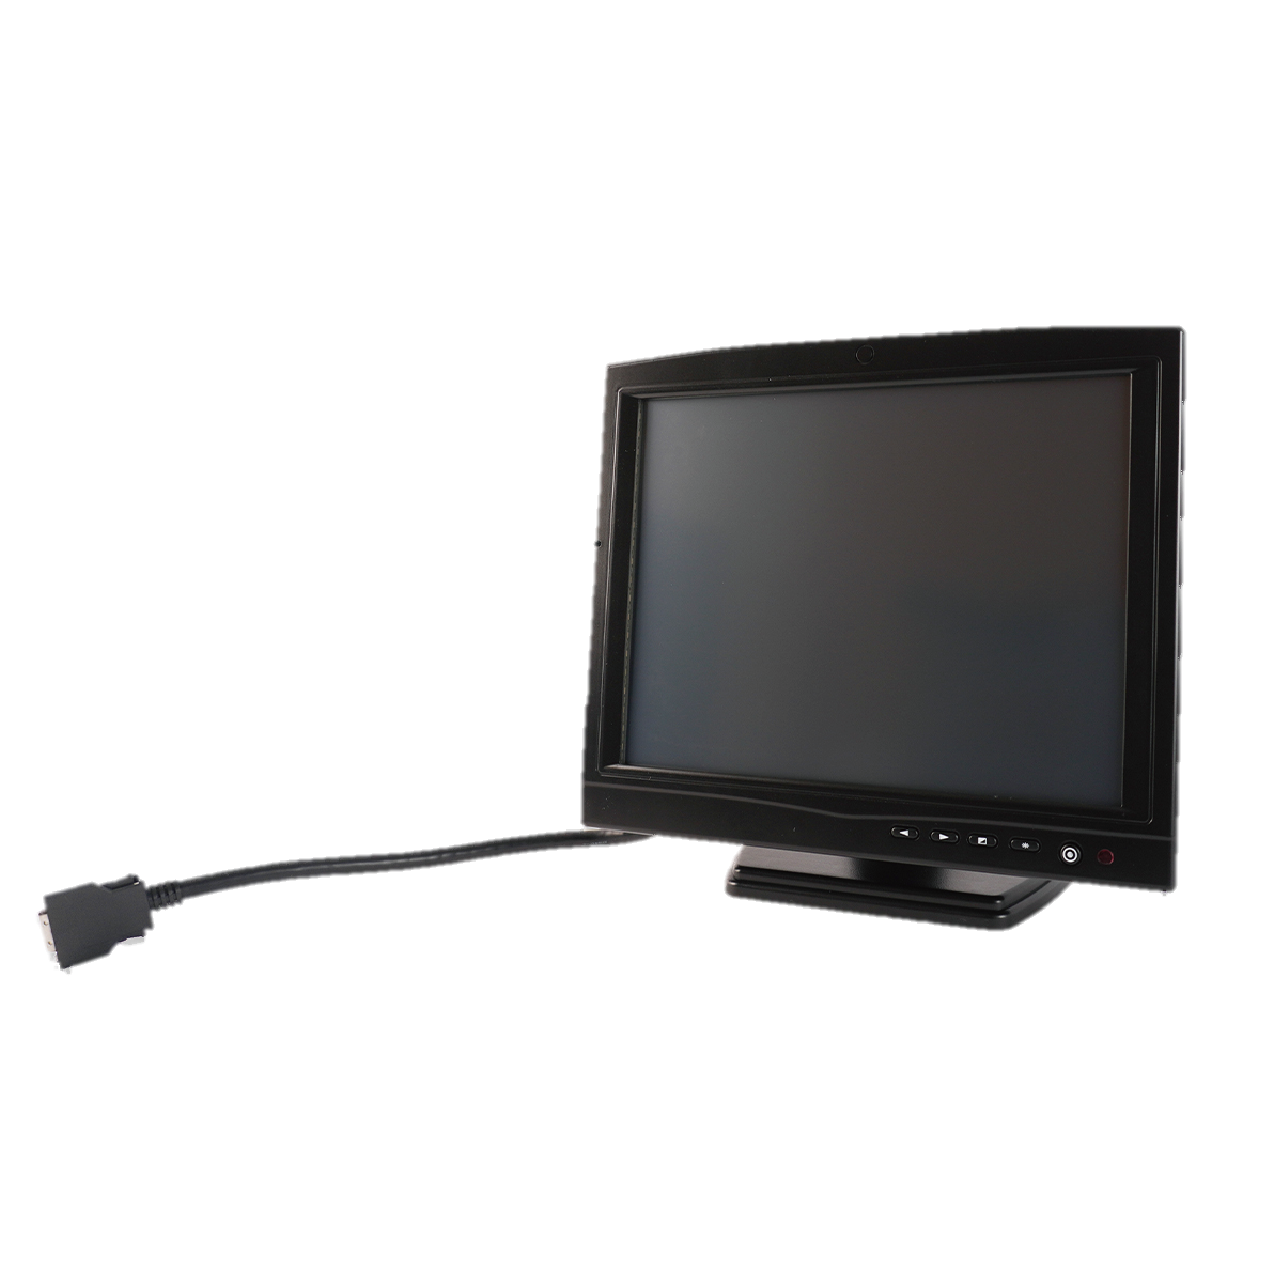 SEF104C-L is an industrial touch monitor which can be used to any kinds of vehicles.